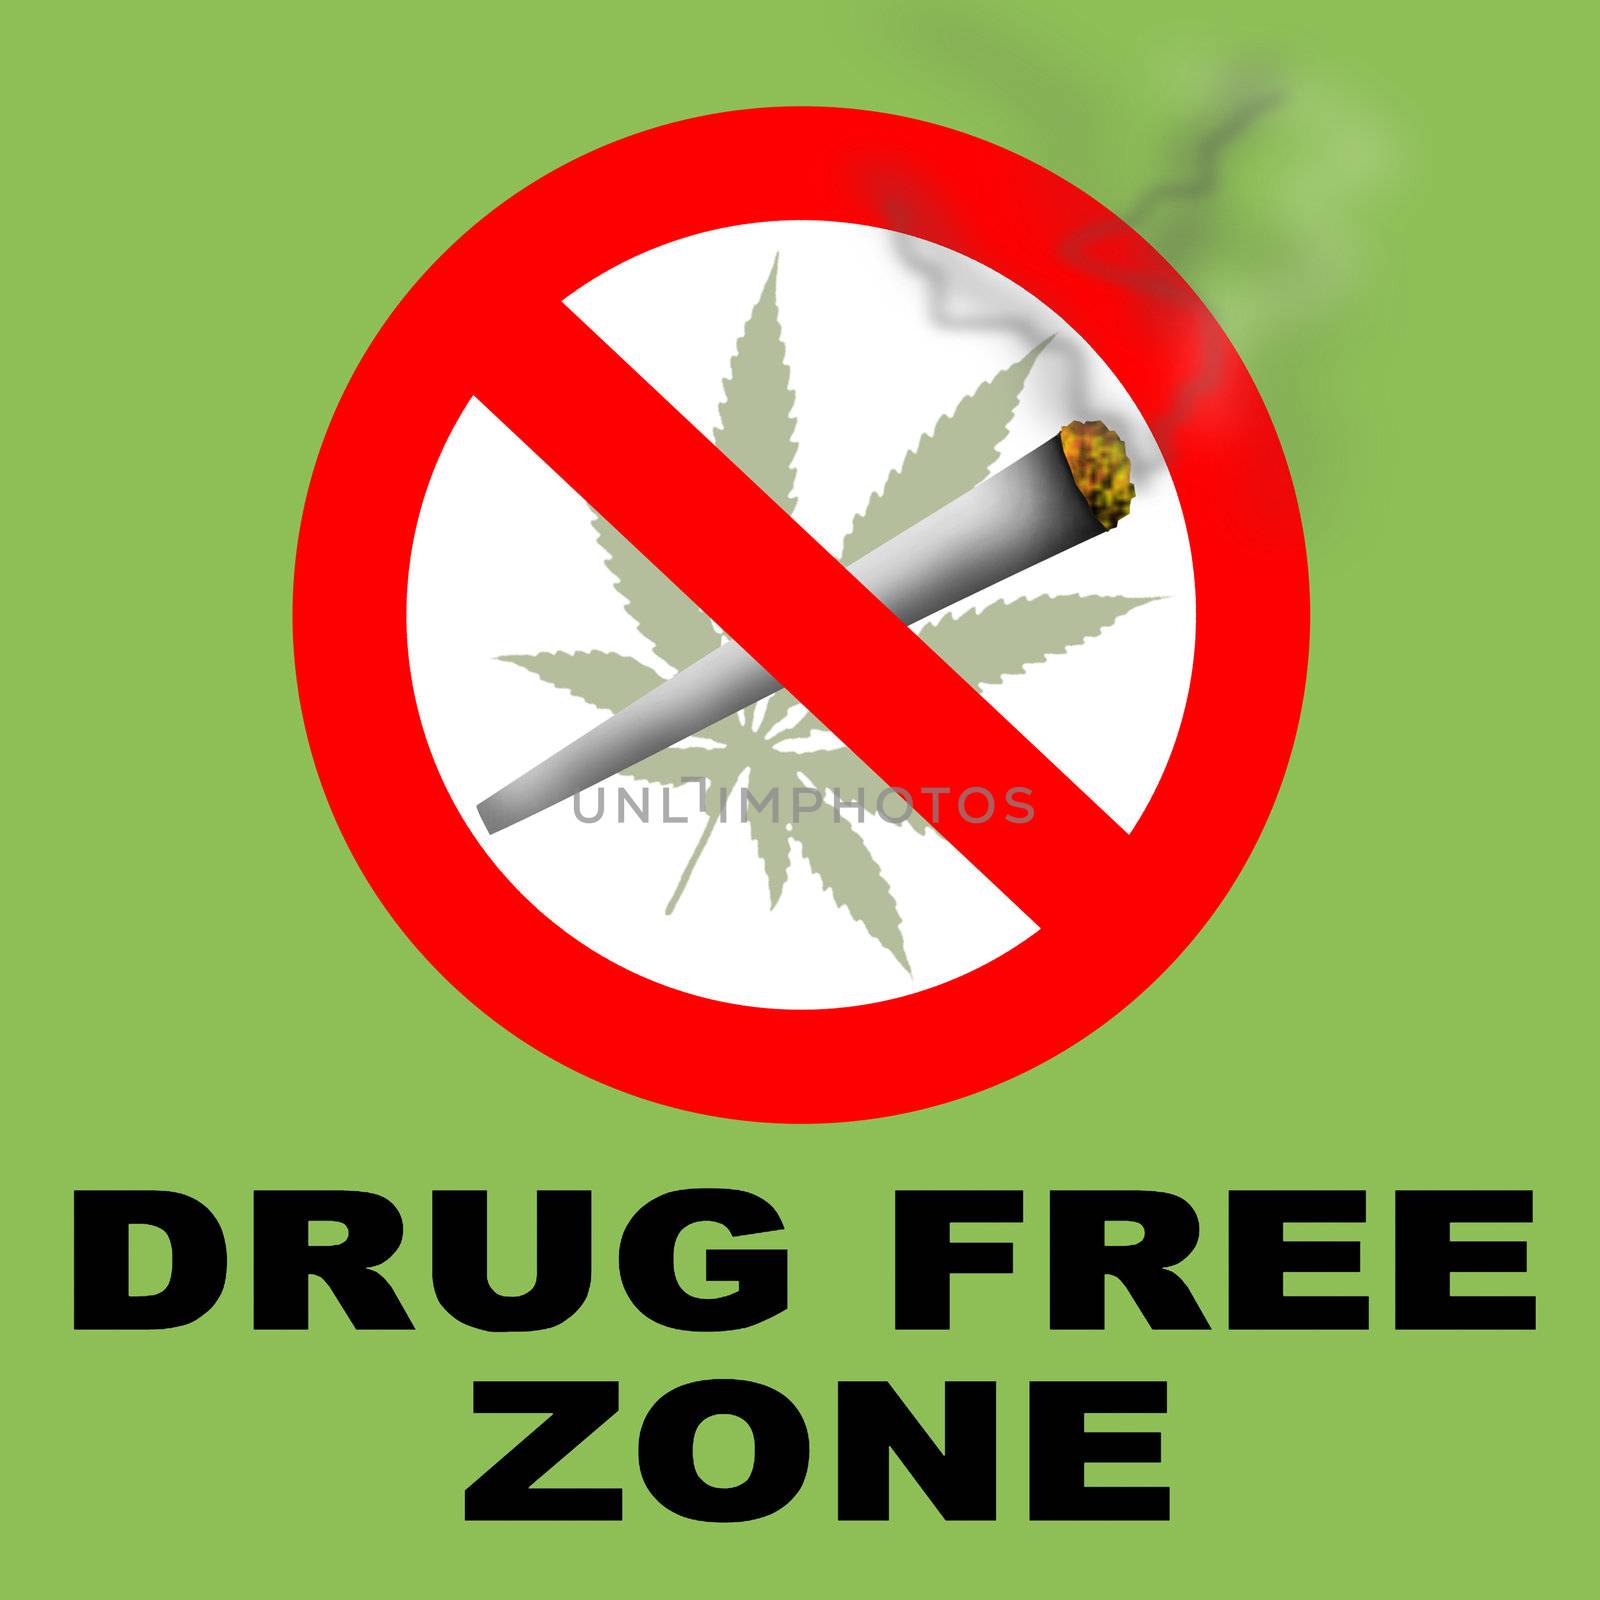 A Drug Free Zone Sign